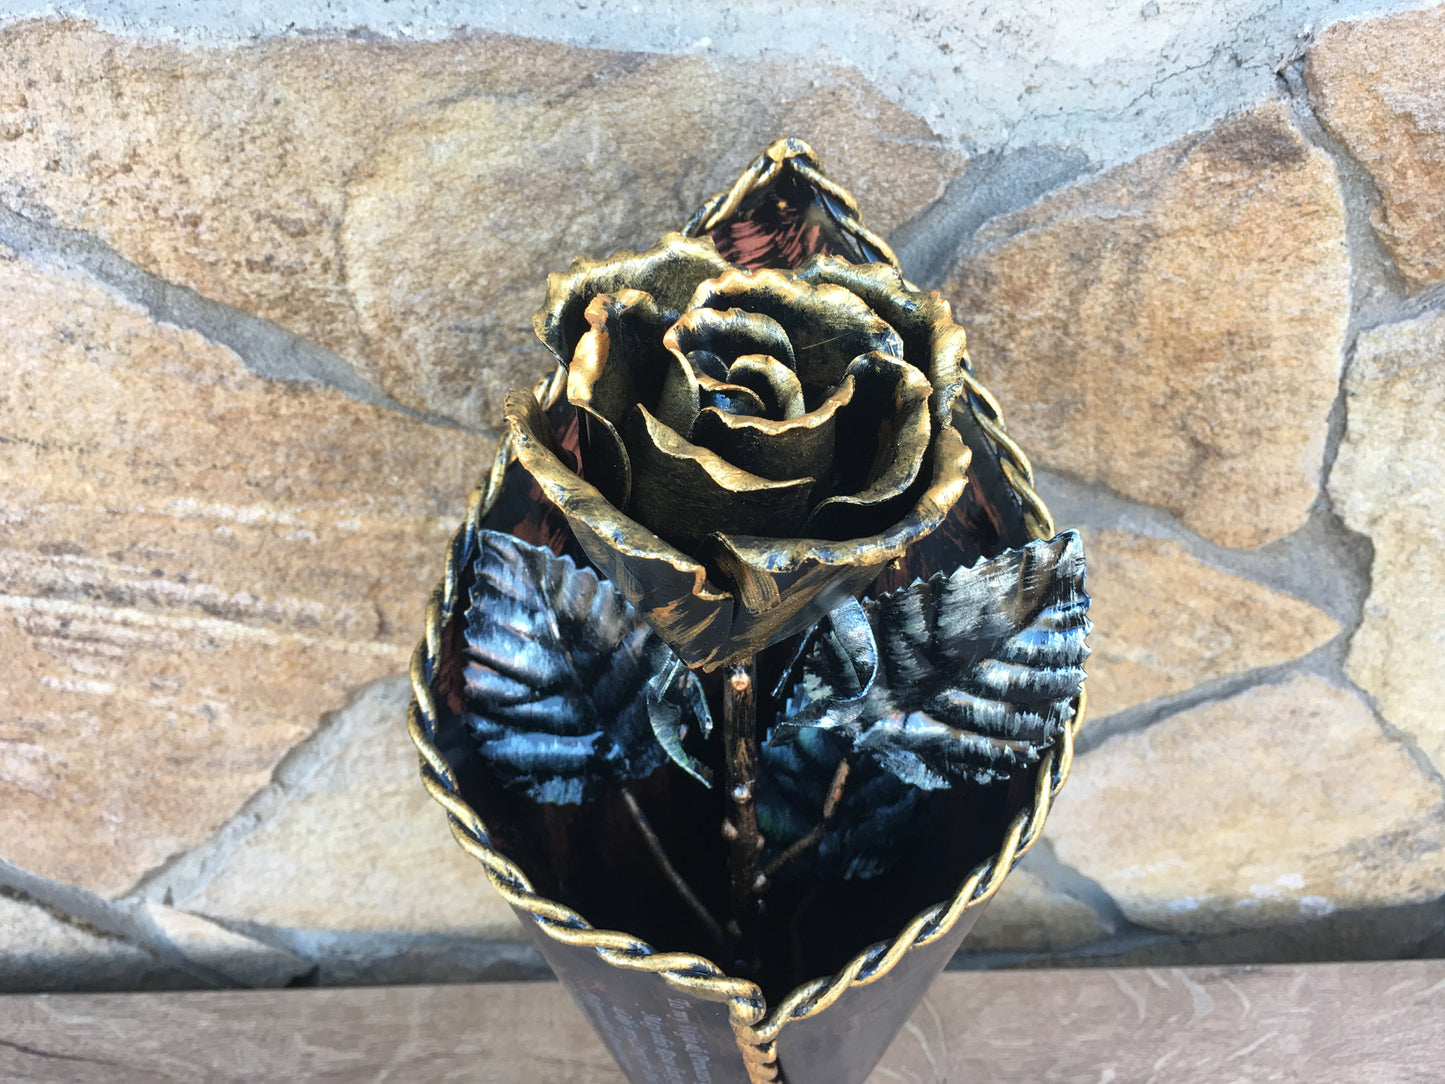 Iron rose in a vase, iron gifts for her, iron anniversary, 6th anniversary gift, hand forged rose, metal sculpture, metal rose, iron gifts